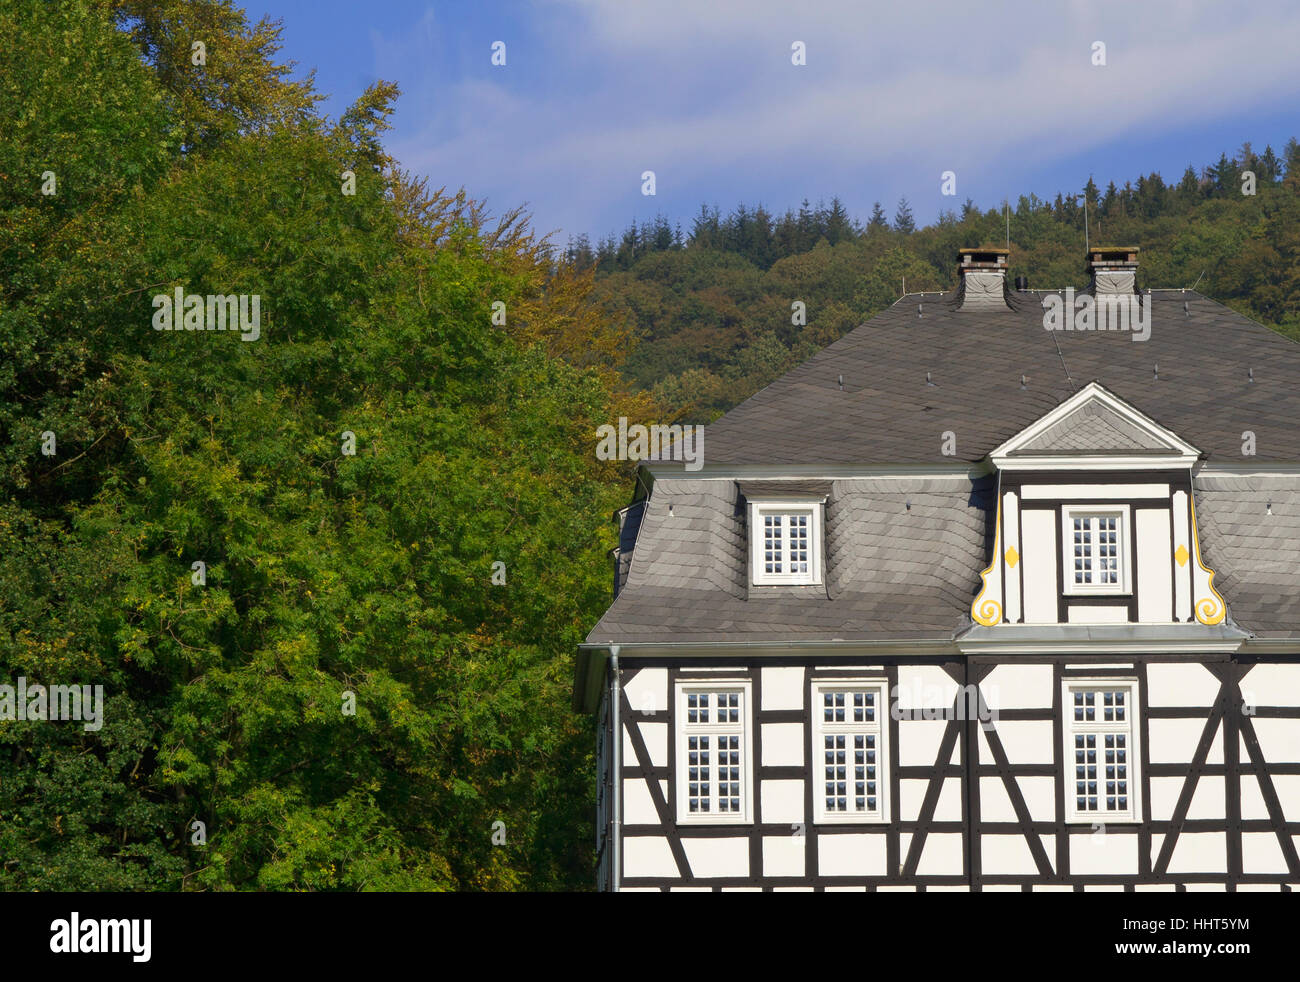 timbered buildings Stock Photo